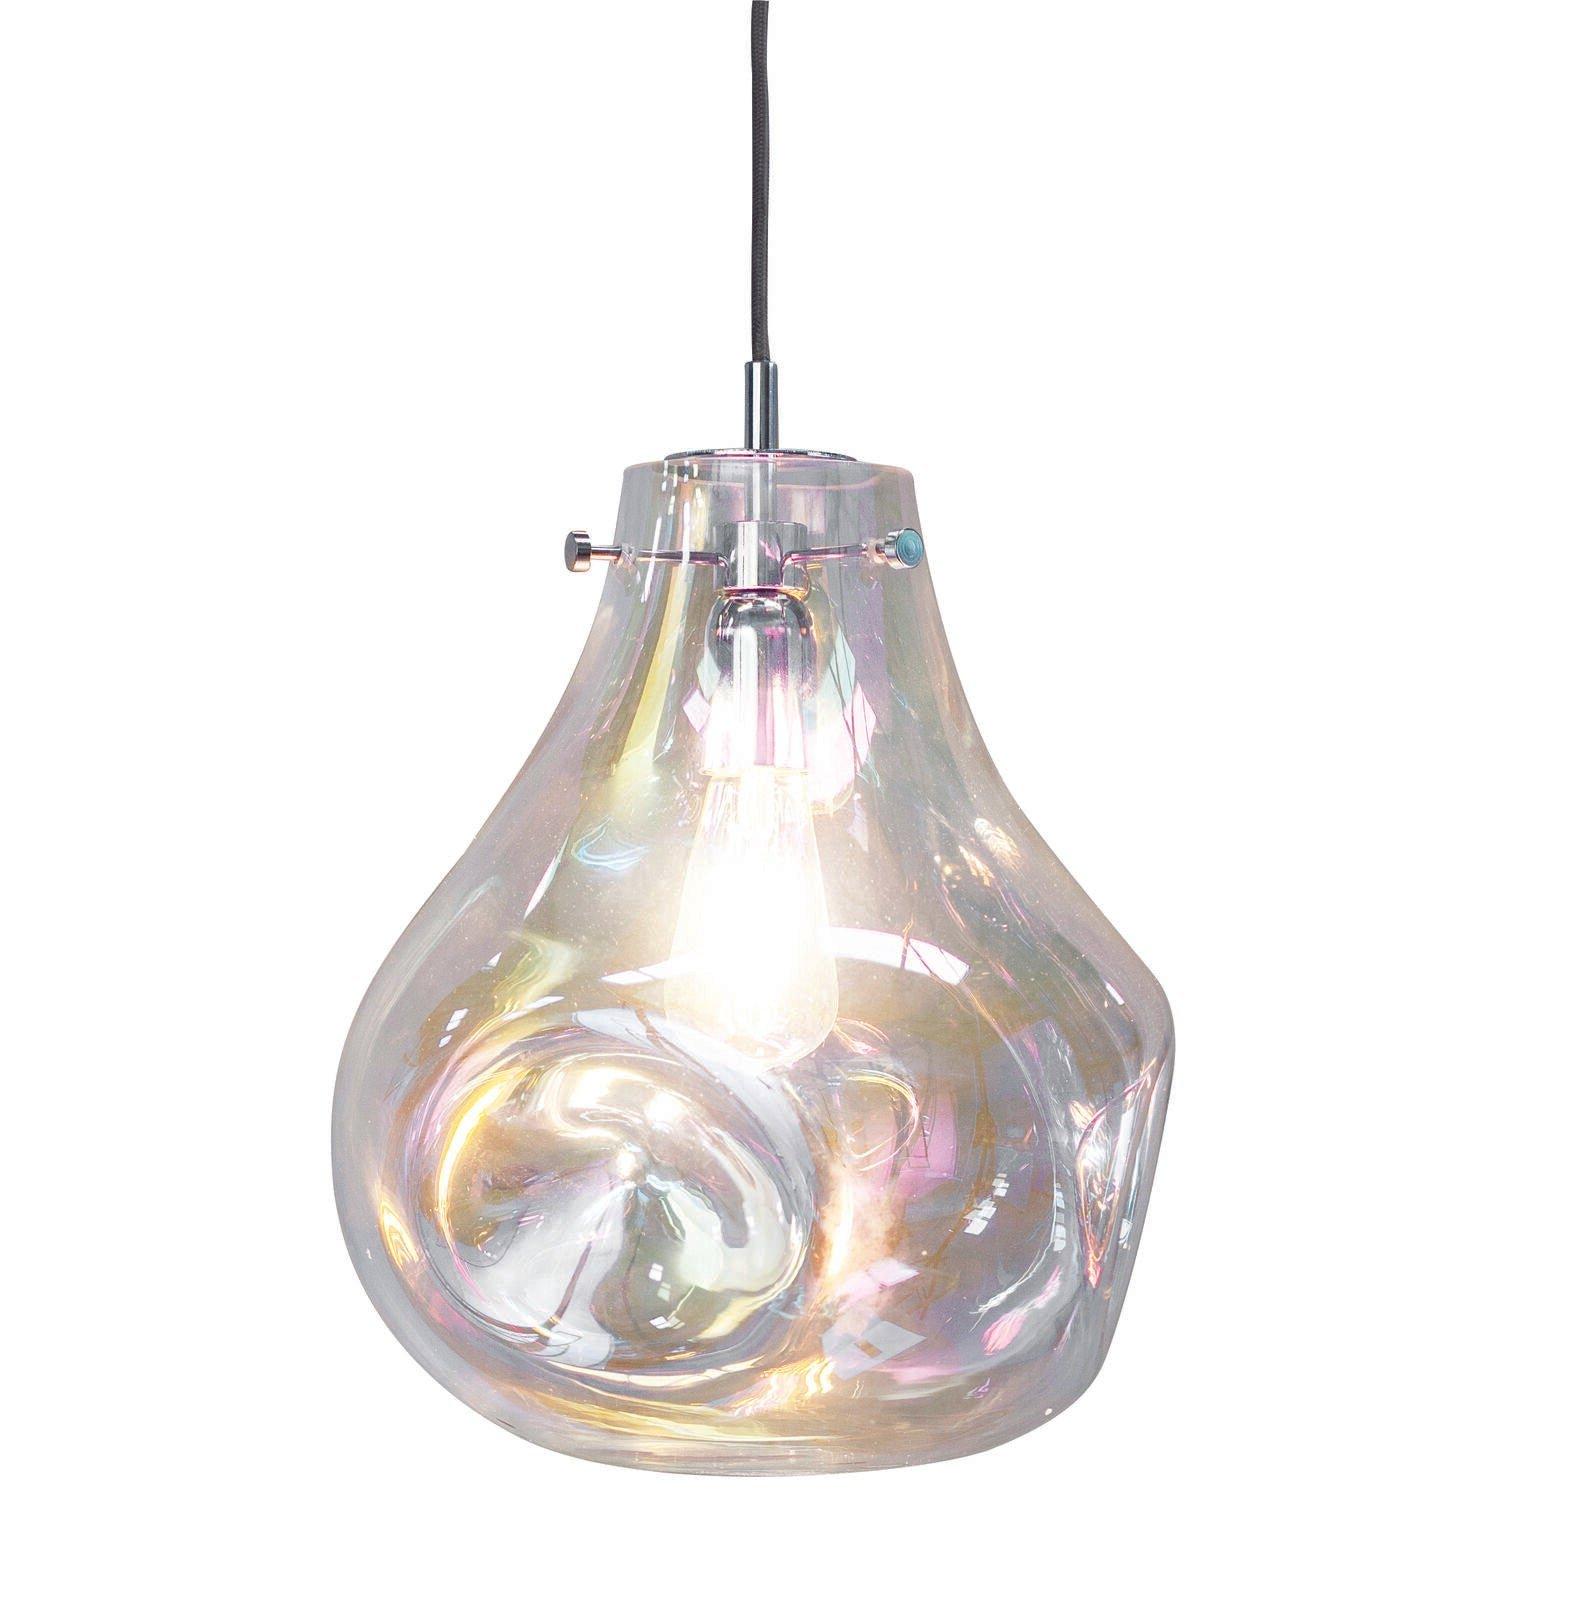 Ceiling Pendant Light Iridescent Glass & Chrome Plate 40W E27 GLS Dimmable